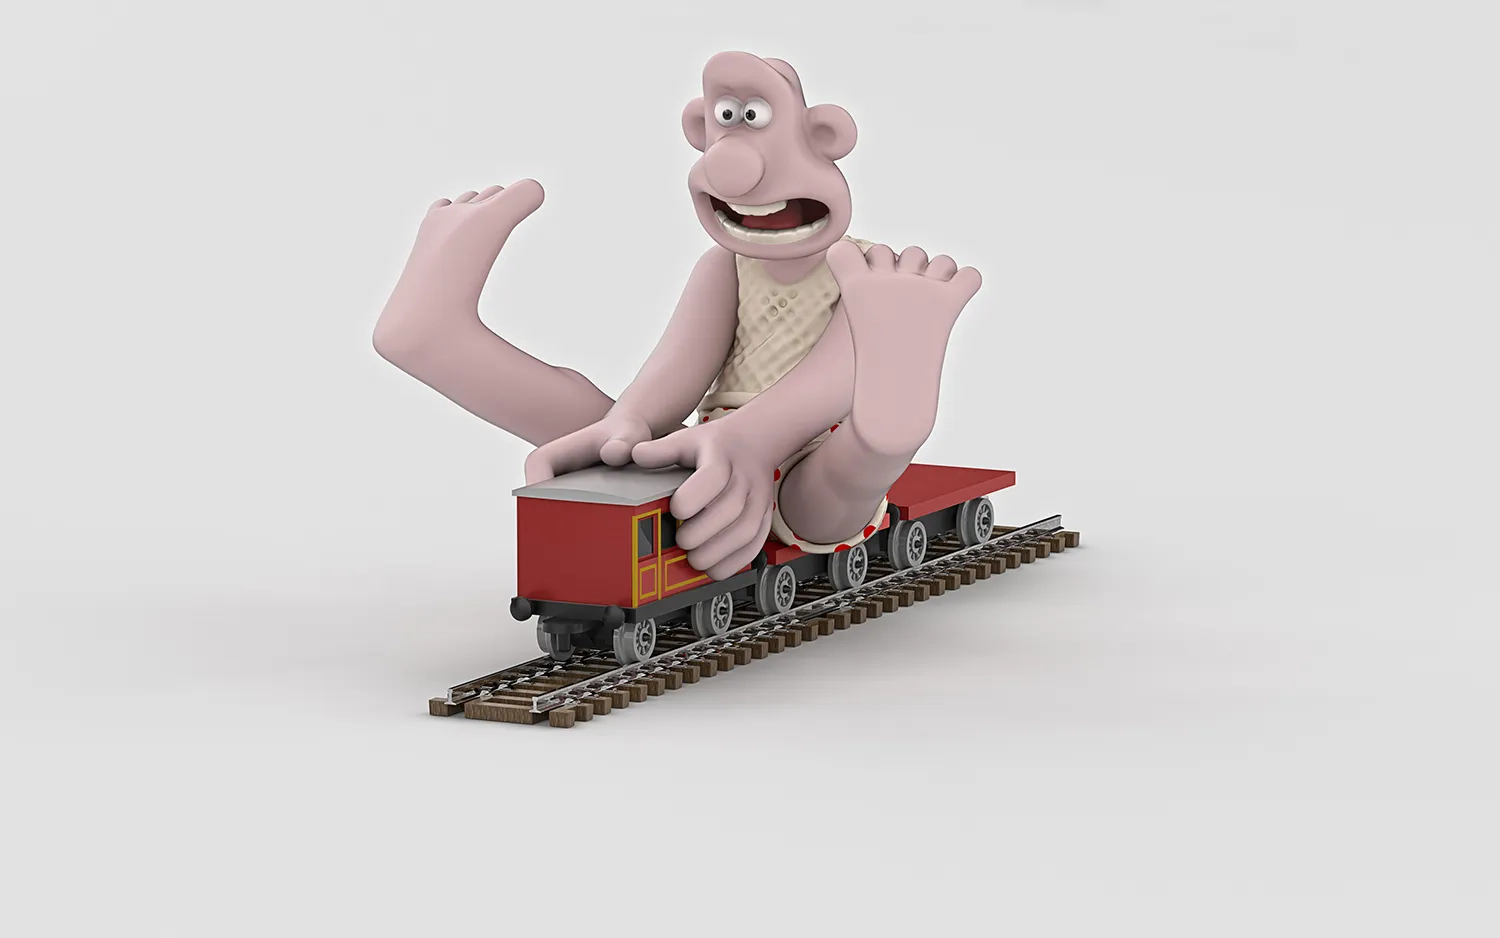 Wallace & Gromit - The Wrong Trousers - Train Set Chase